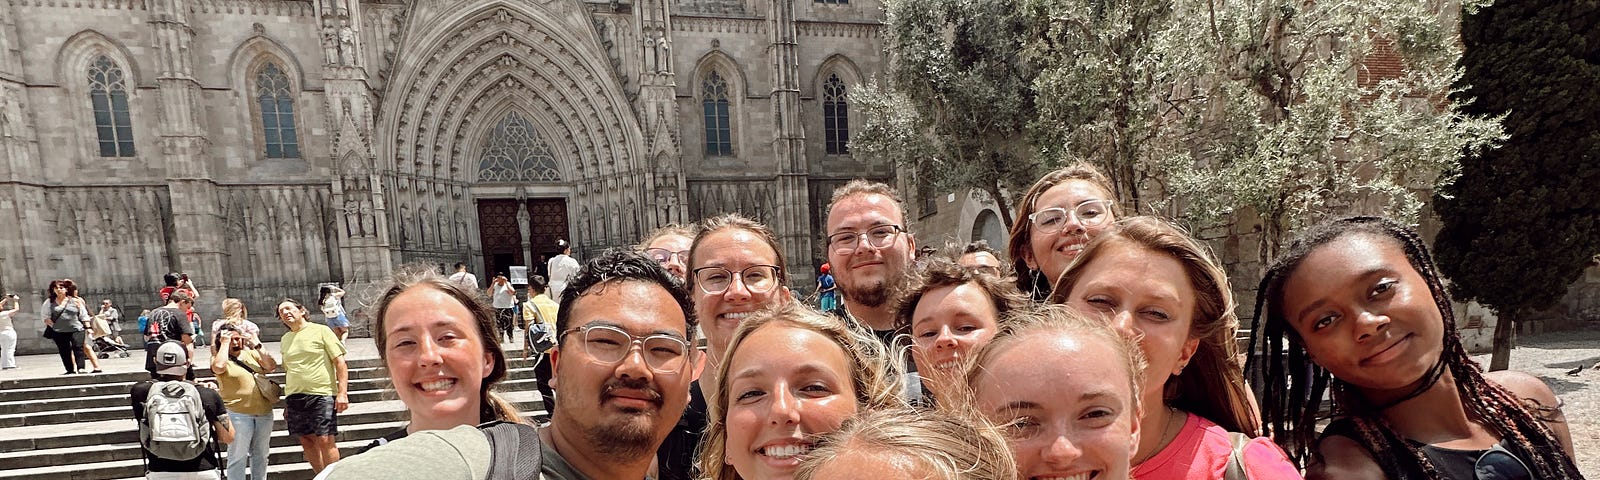 Architecture students take a group selfie during their trip abroad